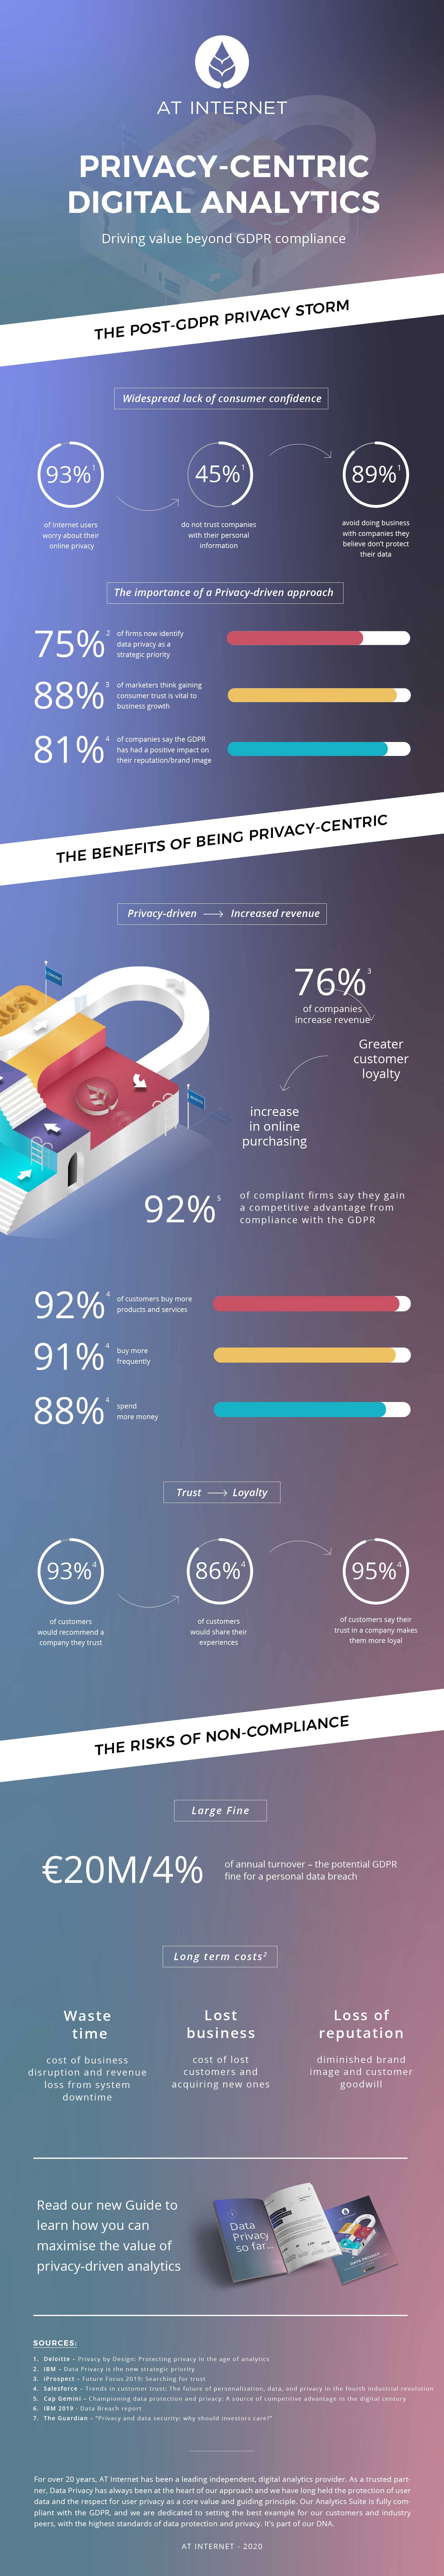 Infographic Data Privacy by AT Internet